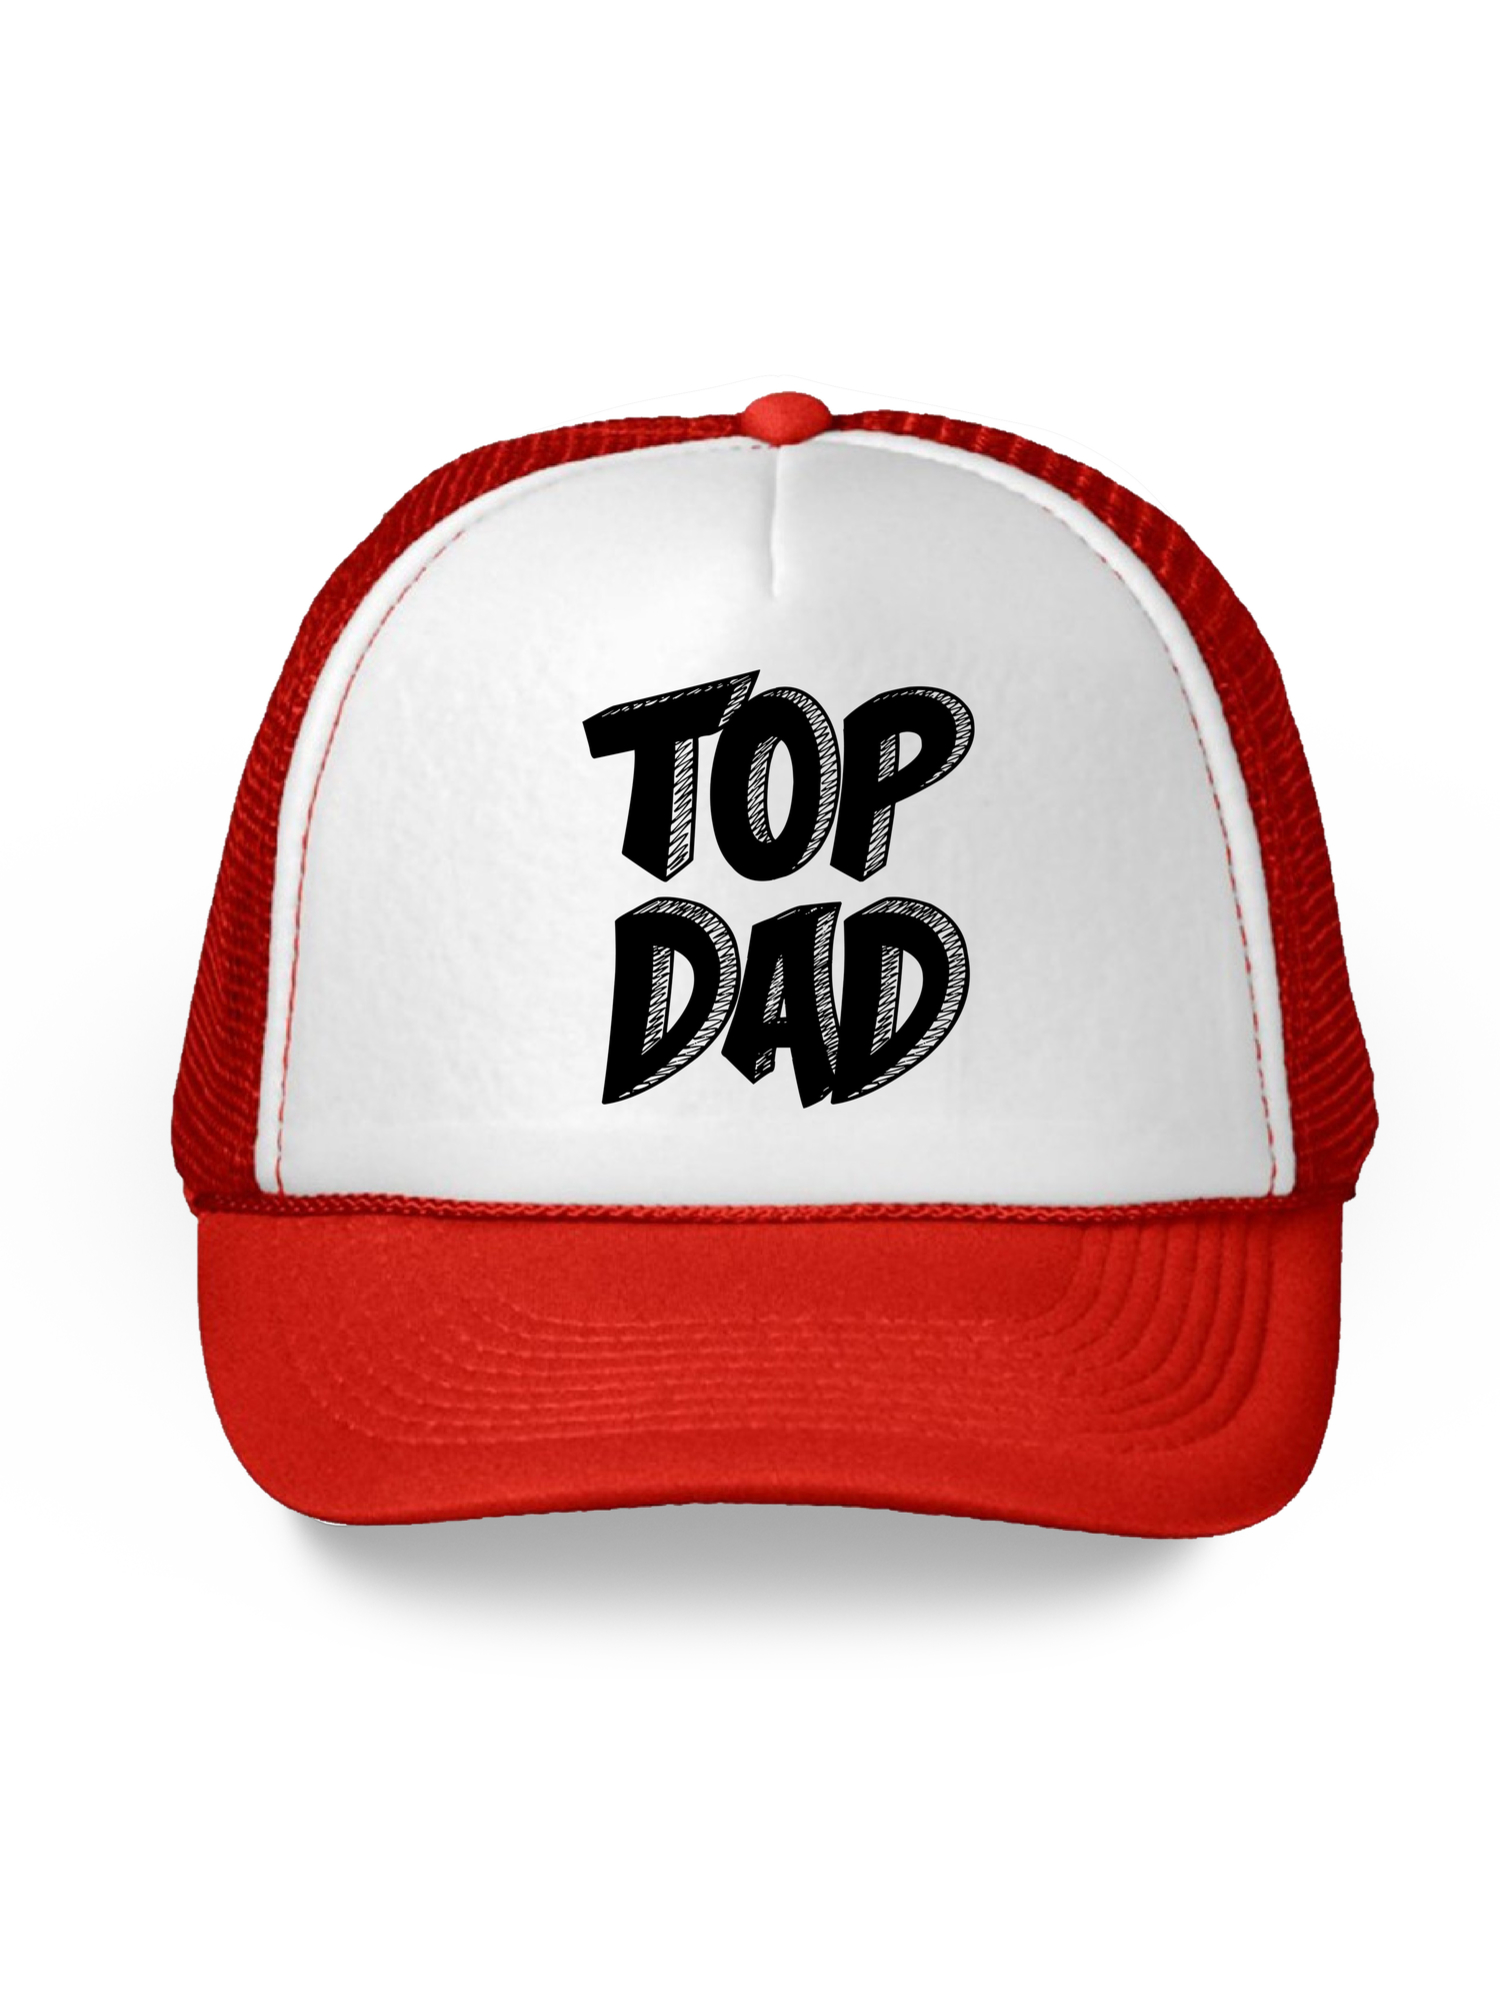 Awkward Syles Gifts for Dad Top Dad Trucker Hat Top Dad Gifts for Father's Day Best Dad Ever Trucker Hat Dad Accessories Father's Day Gifts Dad 2018 Snapback Hat Daddy Cap Best Dad Gifts - image 1 of 6